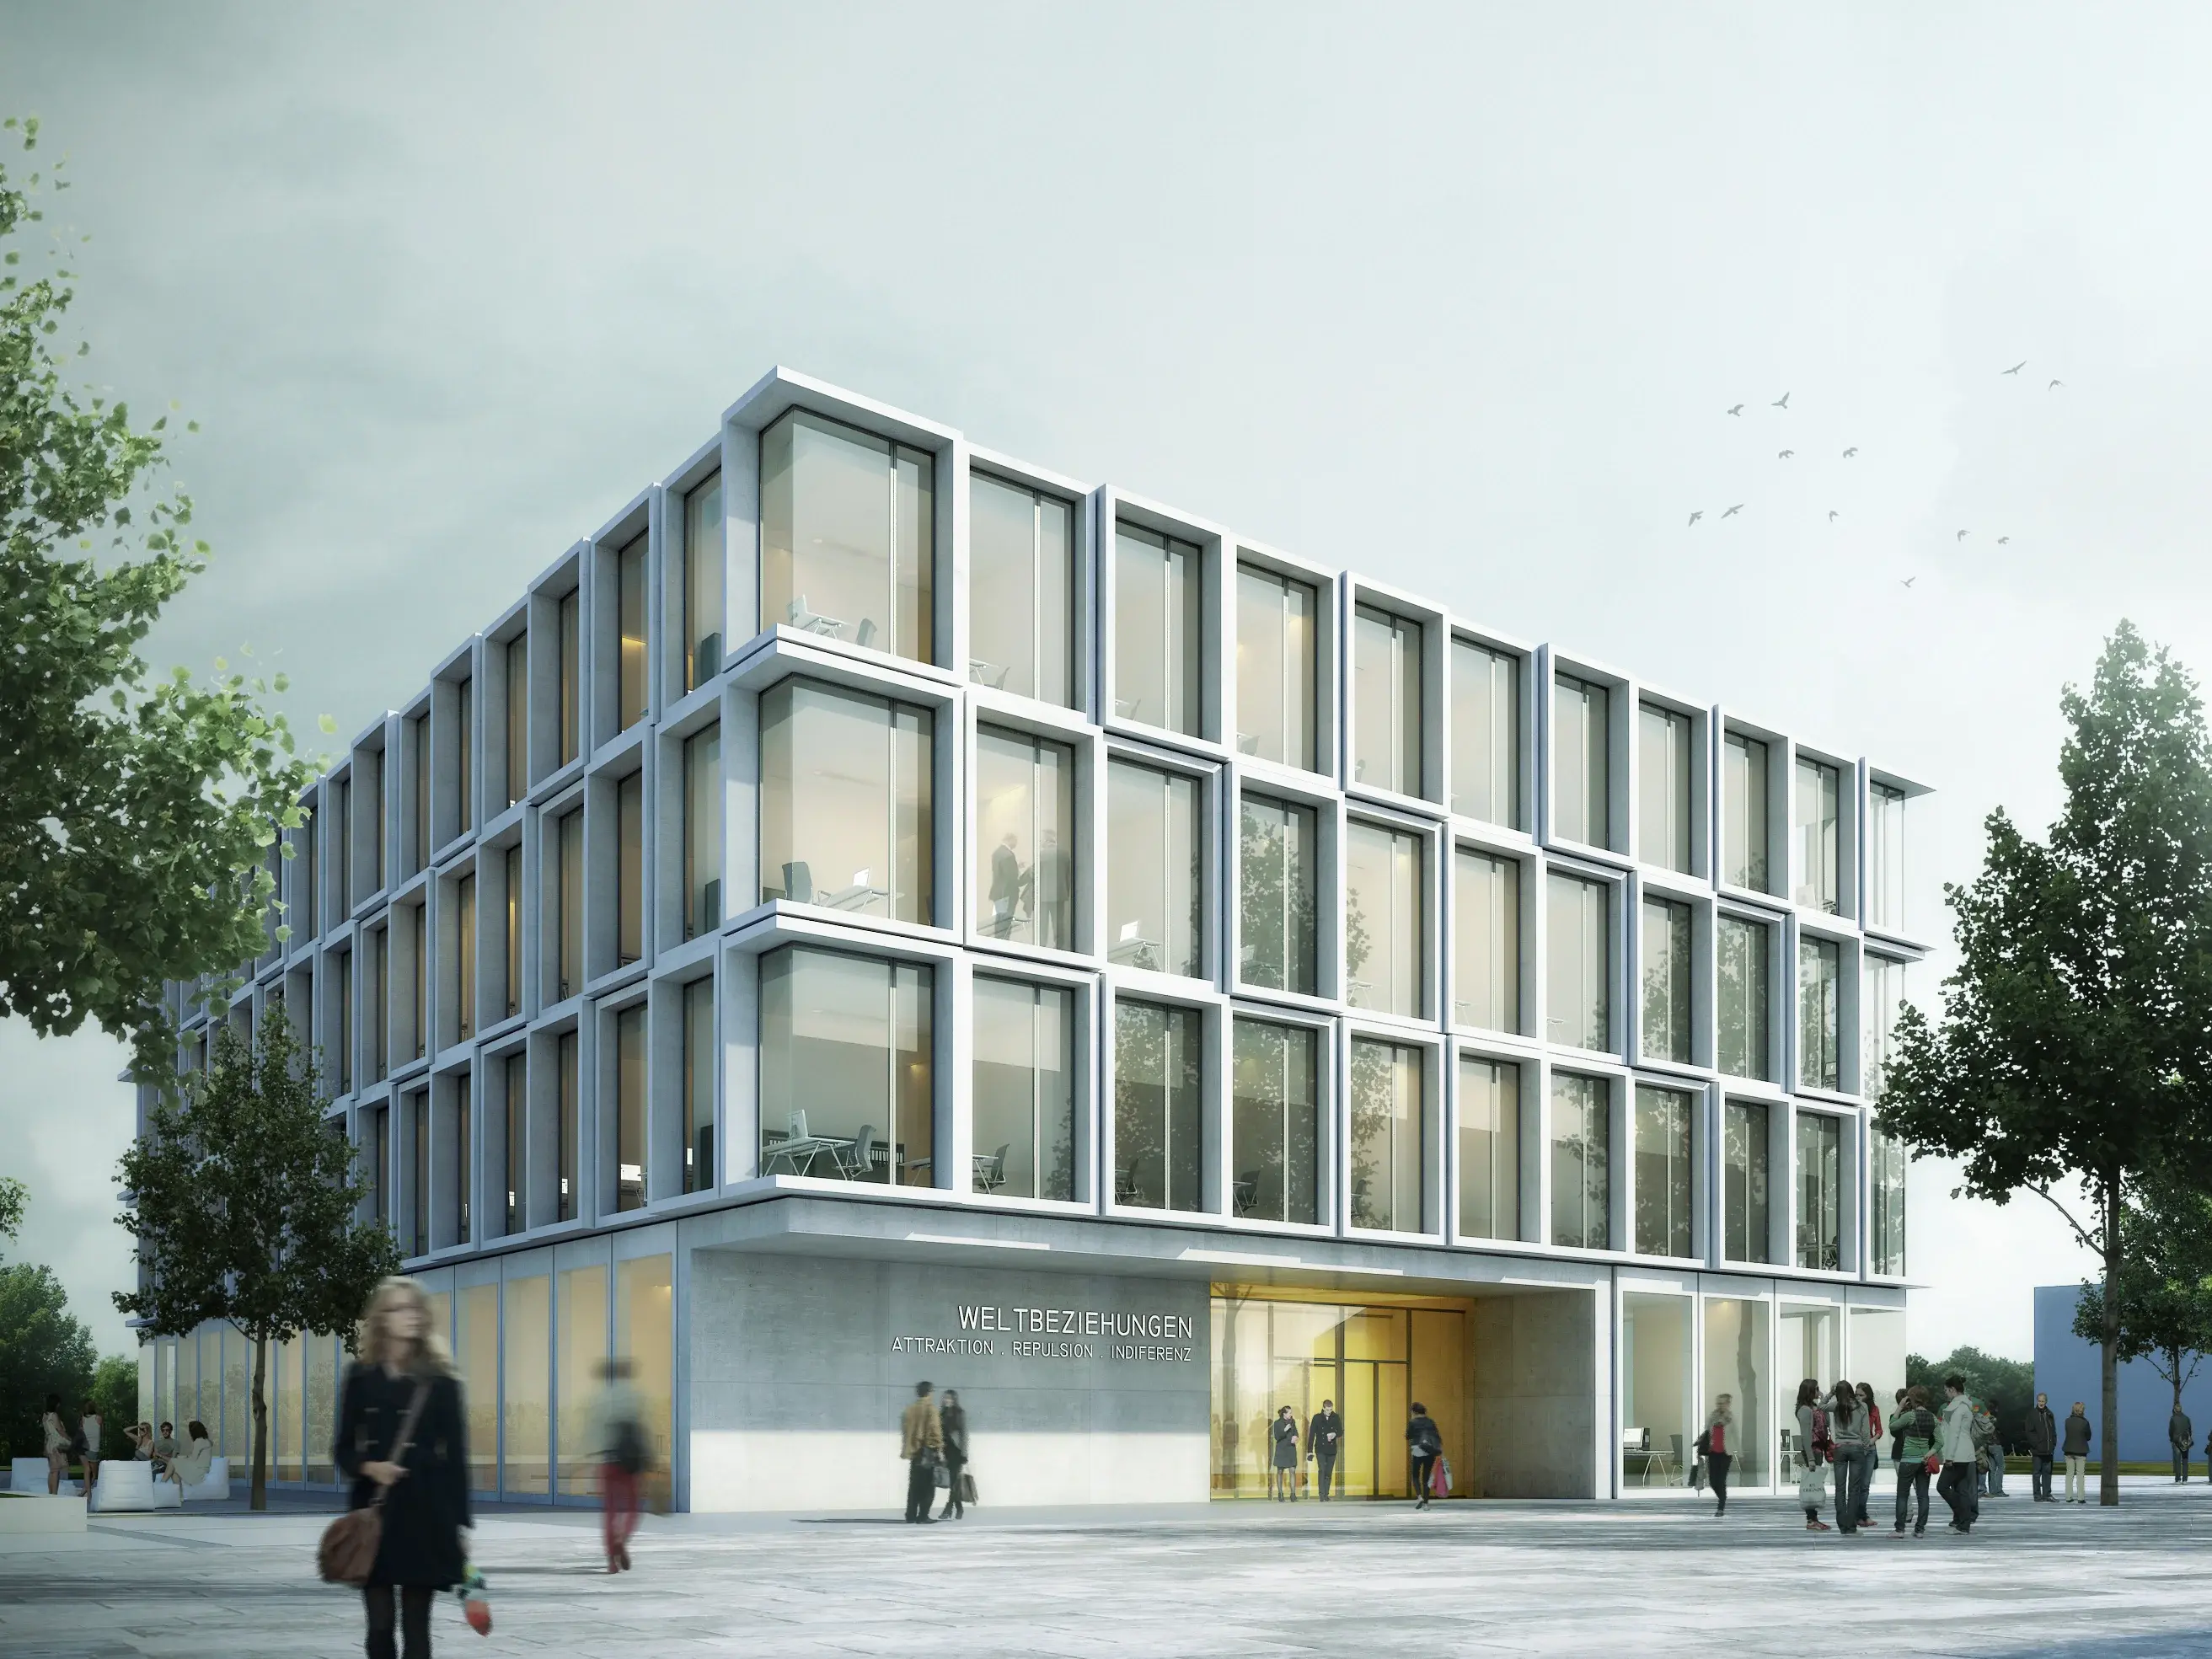 Visualisation of the "World Relations" research building